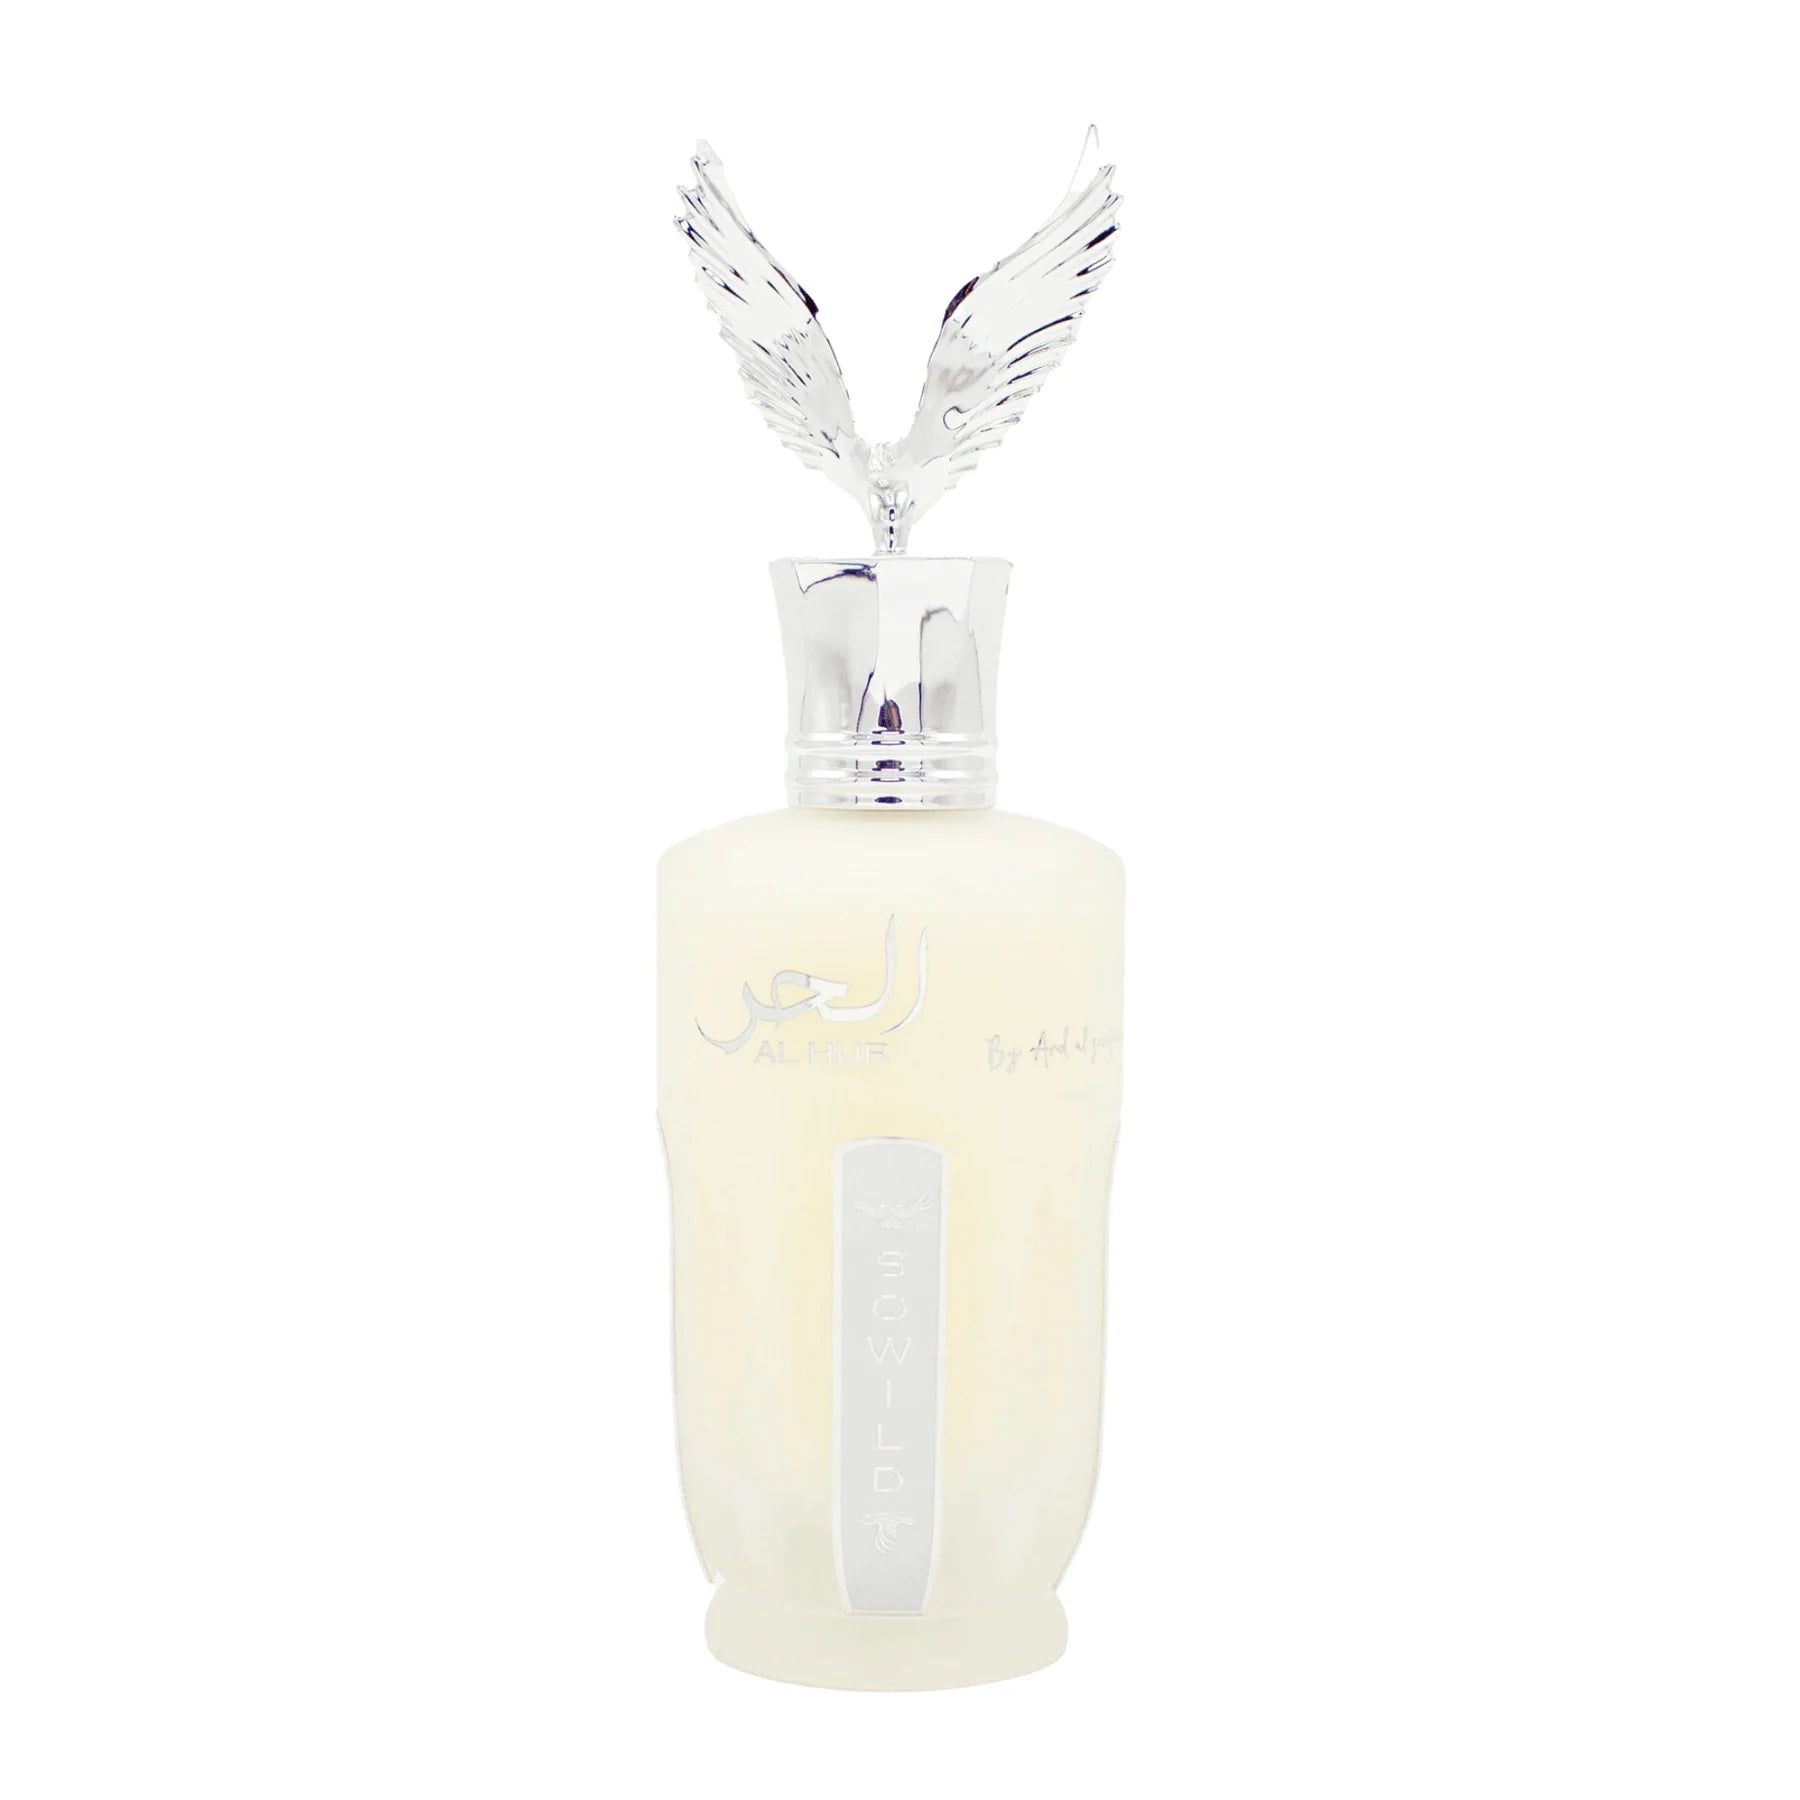 The image shows a perfume bottle with a frosted glass finish and a clear glass cap adorned with a pair of detailed, transparent glass wings. The bottle features elegant script in dark ink, possibly Arabic, with the word "AL HUR" visible, suggesting the name of the fragrance or brand. Below the script, there is a vertical, rectangular label with the word "SOWILD" in a simple, modern font. The background of the image is completely white, emphasizing the purity and simplicity of the bottle's design.